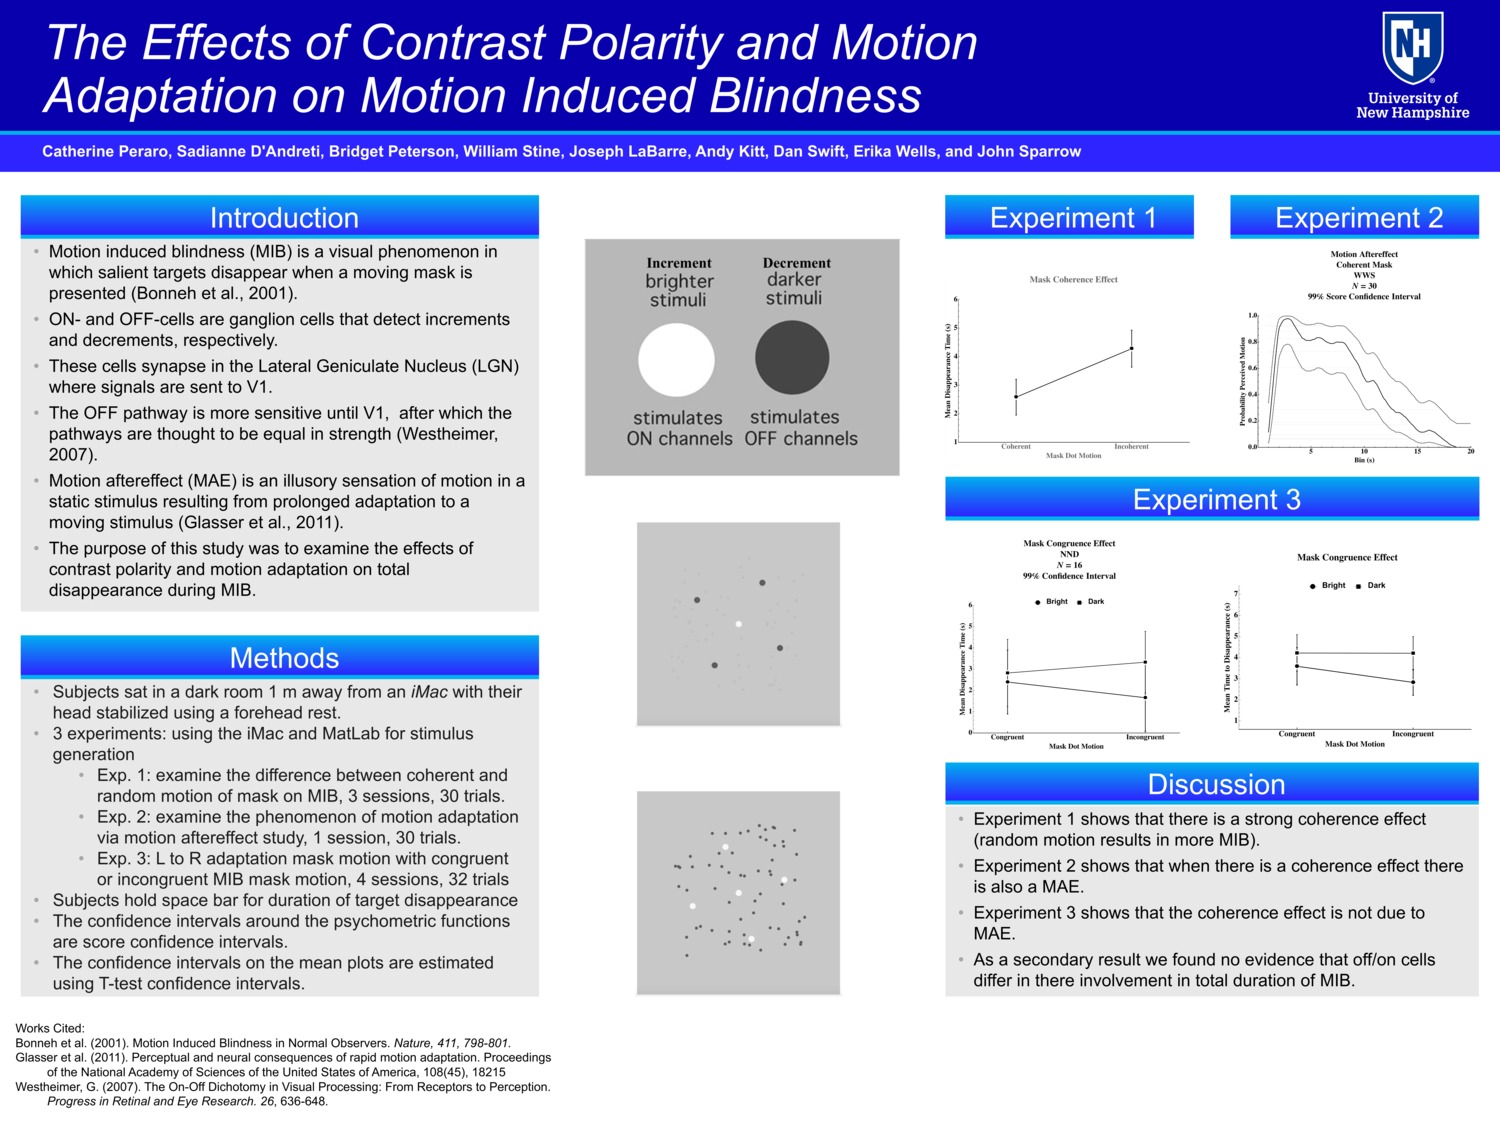 The Effects Of Contrast Polarity And Motion Adaptation On Motion Induced Blindness by cmp1014